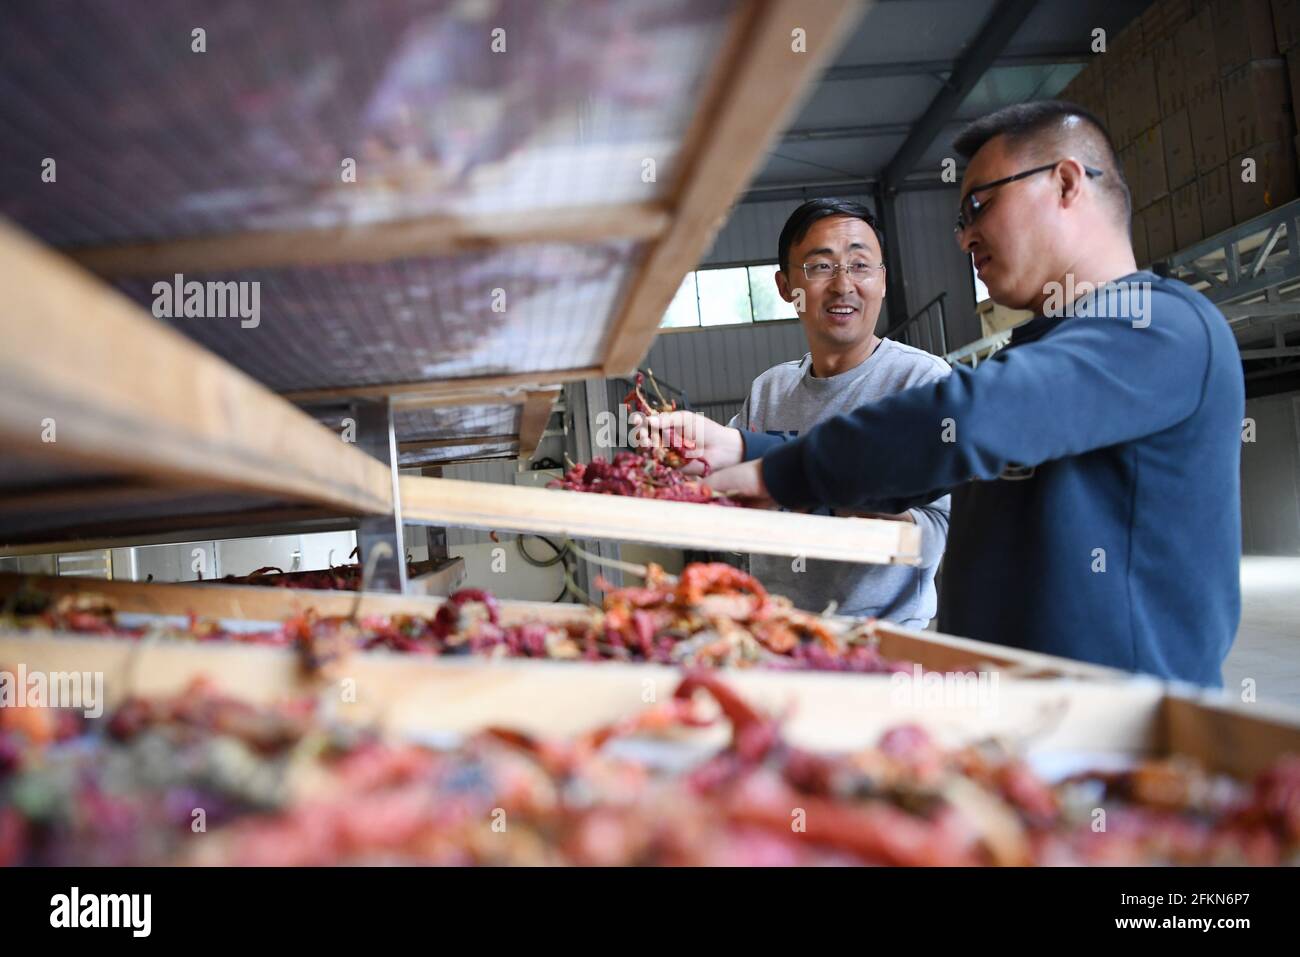 (210503) -- TIANSHUI, May 3, 2021 (Xinhua) -- Zhang Shuhao (L) works with his colleague in a warehouse in Mudan Township, Tianshui City of northwest China's Gansu Province, on April 28, 2021. Zhang Shuhao, 42, quit his well-paid job three years ago to start an agriculture company with a few partners sharing the same vision at a mountainous village in Mudan Township, Tianshui City. In three years, Xinghuarong, Zhang's company, contracted 6,200 mu (about 413 hectares) of idle arable lands, where terraced fields, greenhouses, and a reservoir have been built to grow diverse produces ranging from Stock Photo